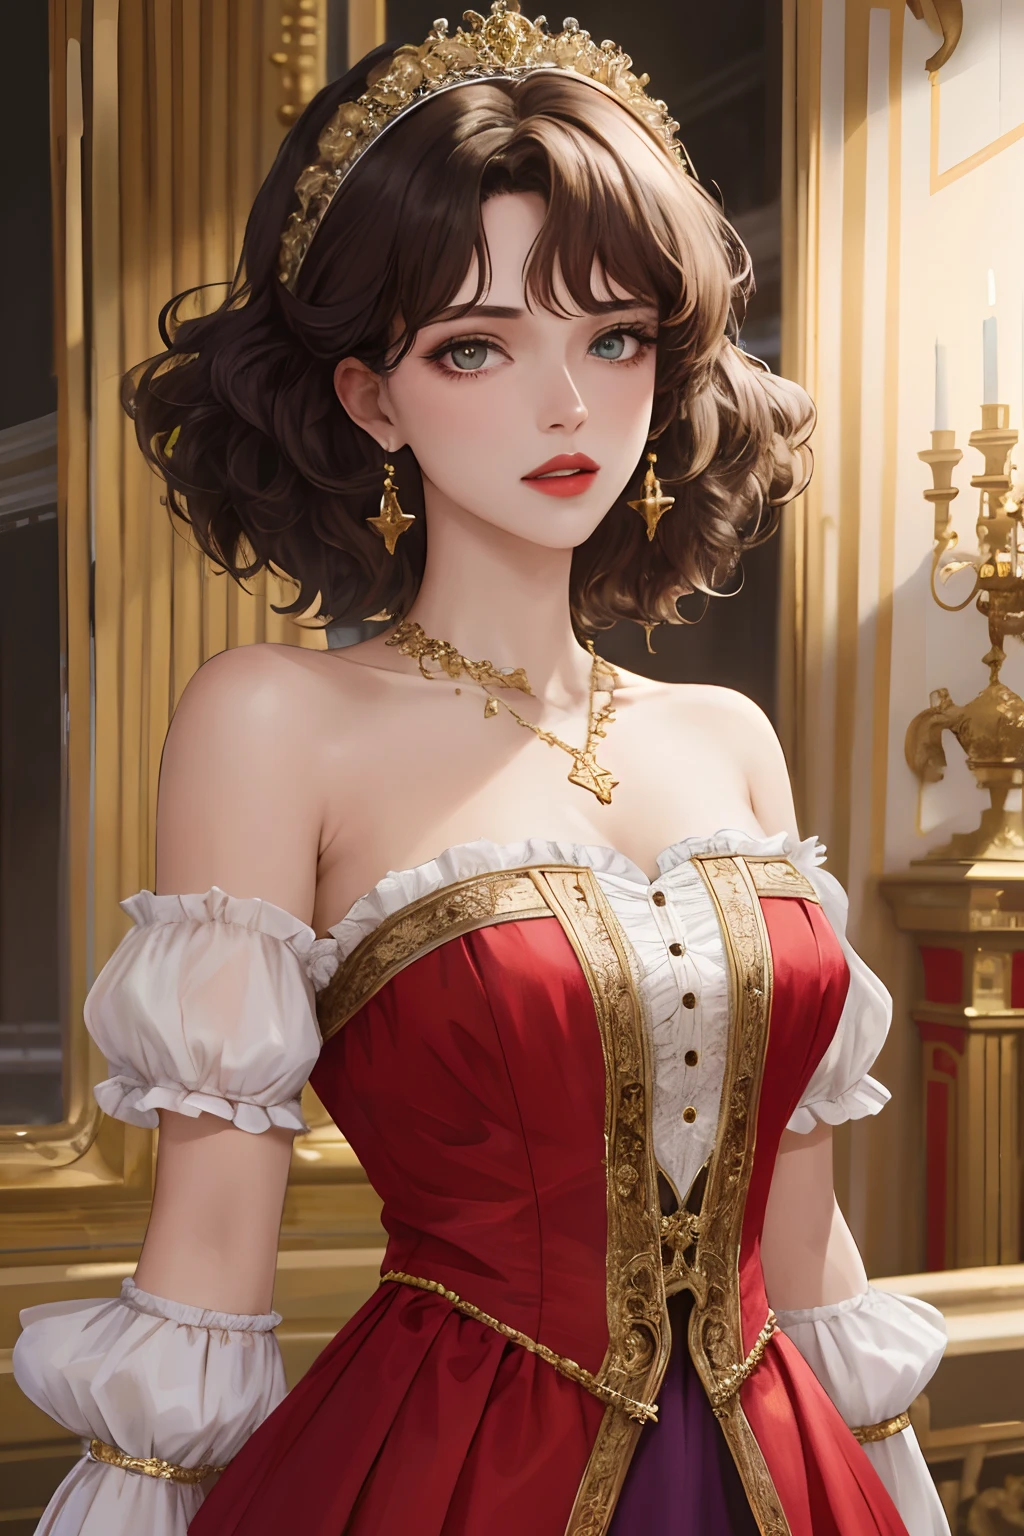 8k, best quality, masterpiece, highly detailed, semi realistic, a girl, young woman, 20 years old, dark brown short hair, curly hair, banks, dark purple eyes, red lips, gorgeous Rococo style court dress, strapless skirt, cross tie vest, bare shoulders, arm puffy sleeves, gold gem necklace, slim figure, silver crown, cold expression